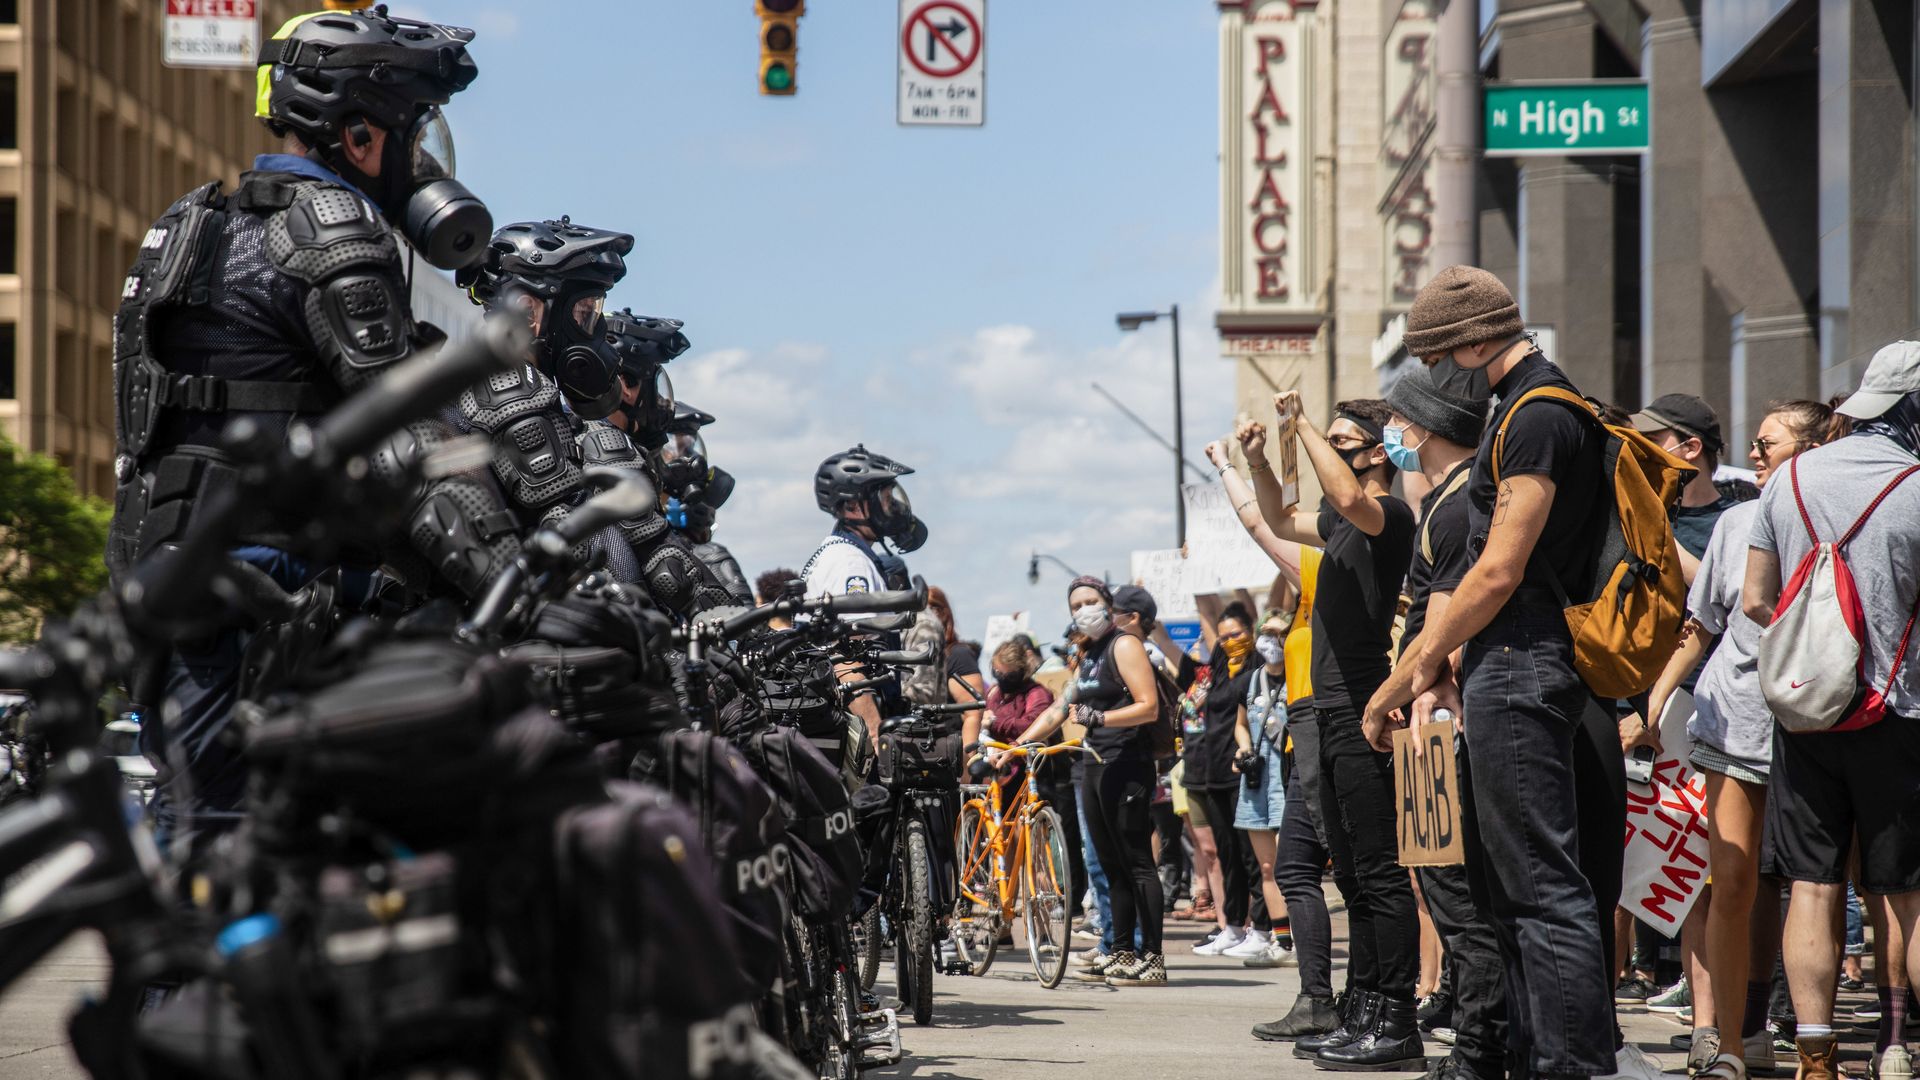 Protesters and police officers stand in lines facing each other in the intersection of High and Broad streets during the 2020 protests